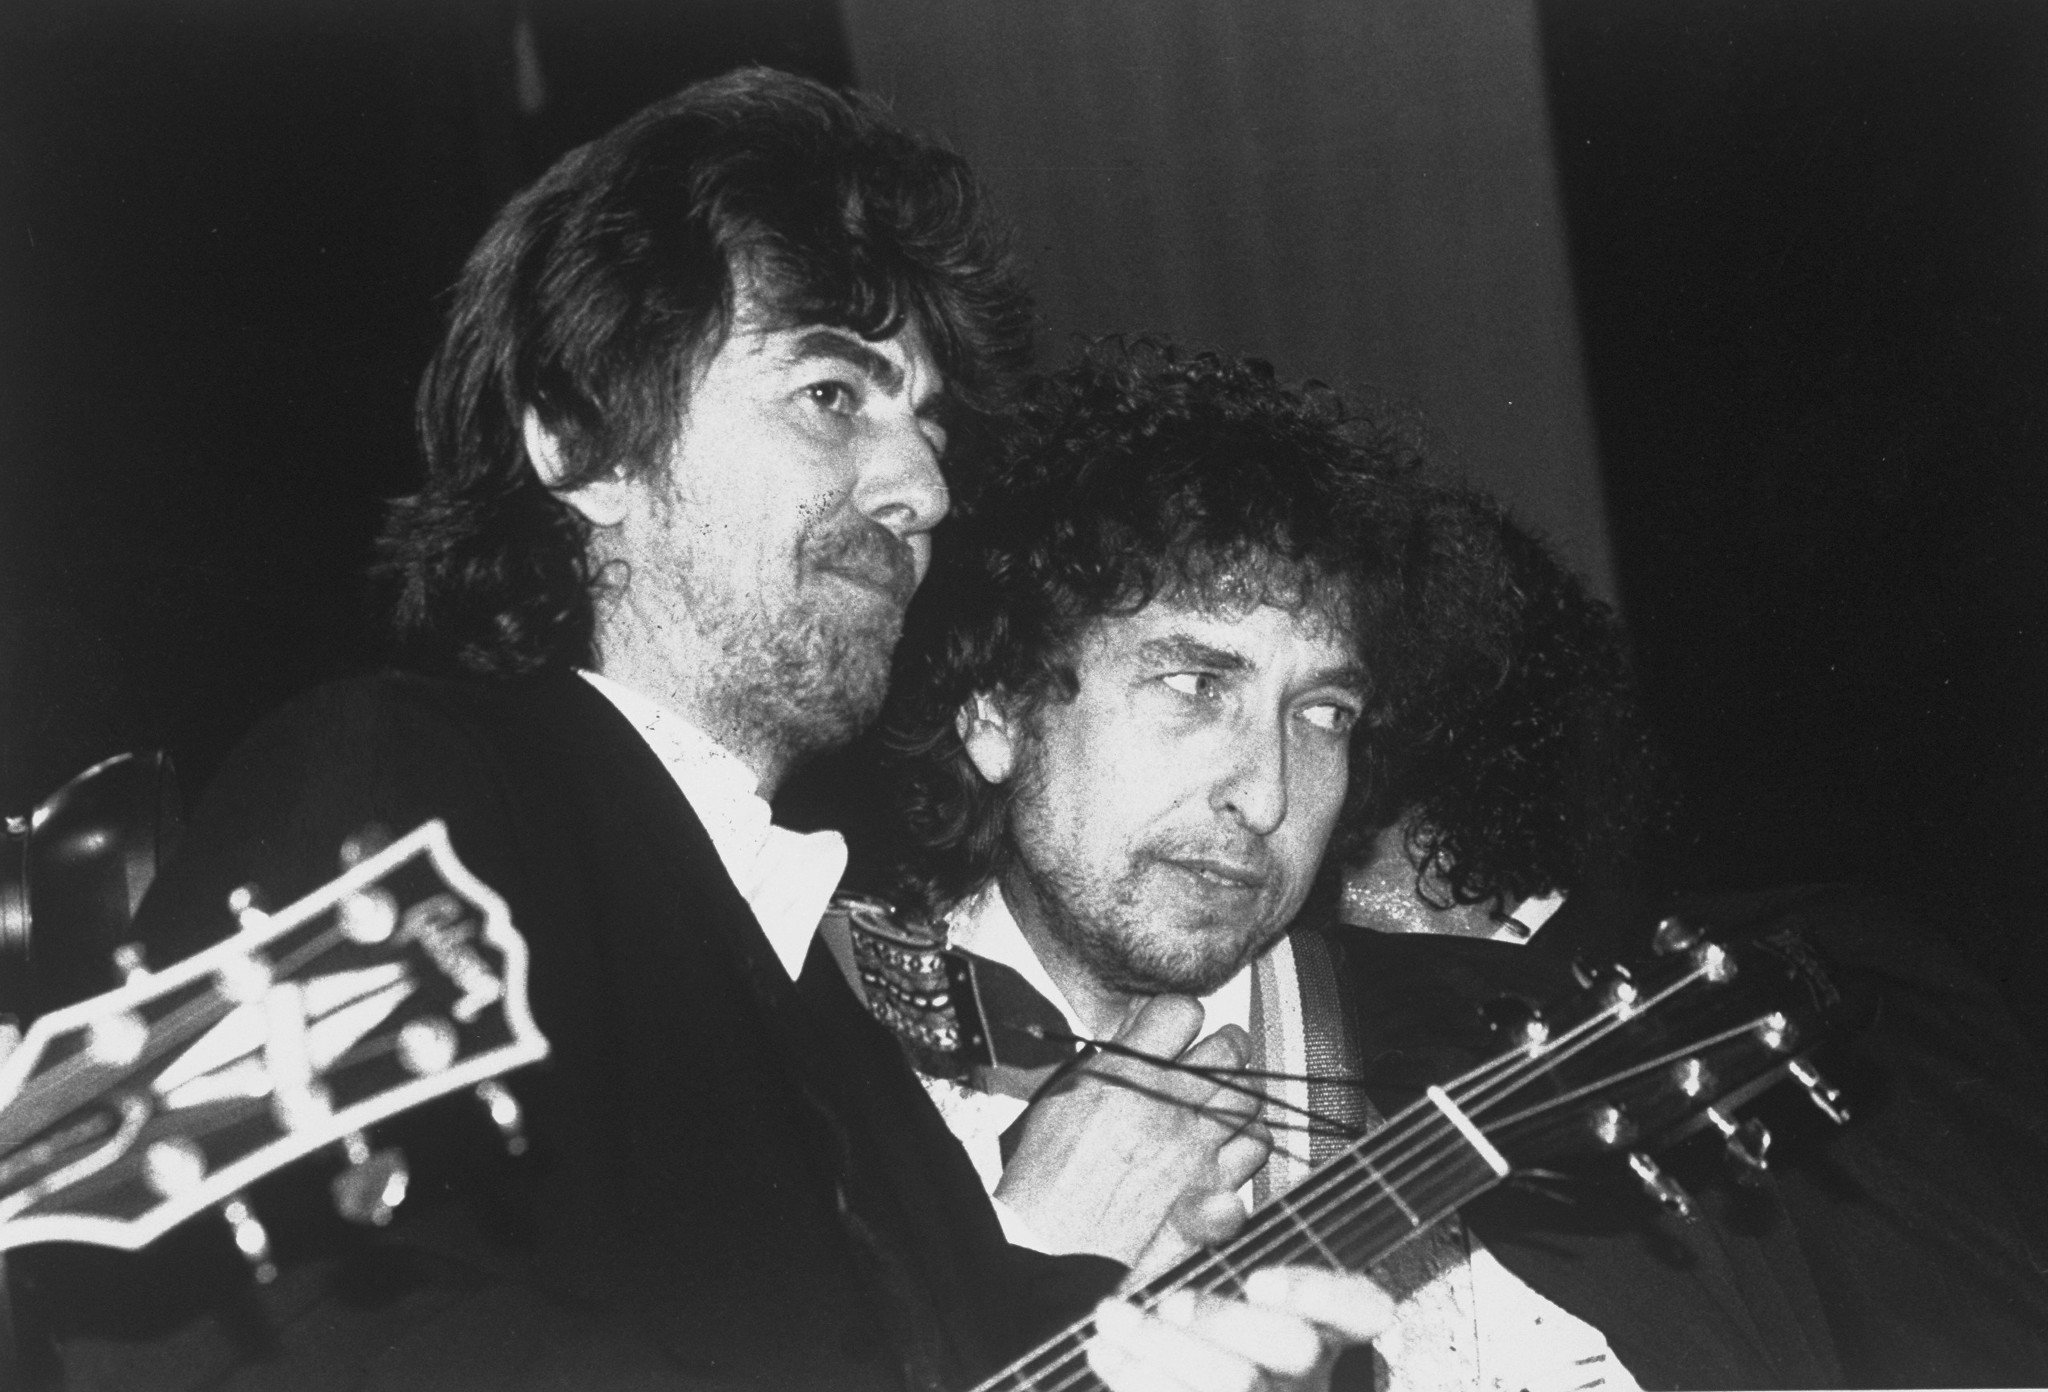 George Harrison of The Beatles and Bob Dylan at the Rock and Roll Hall of Fame Induction Ceremony